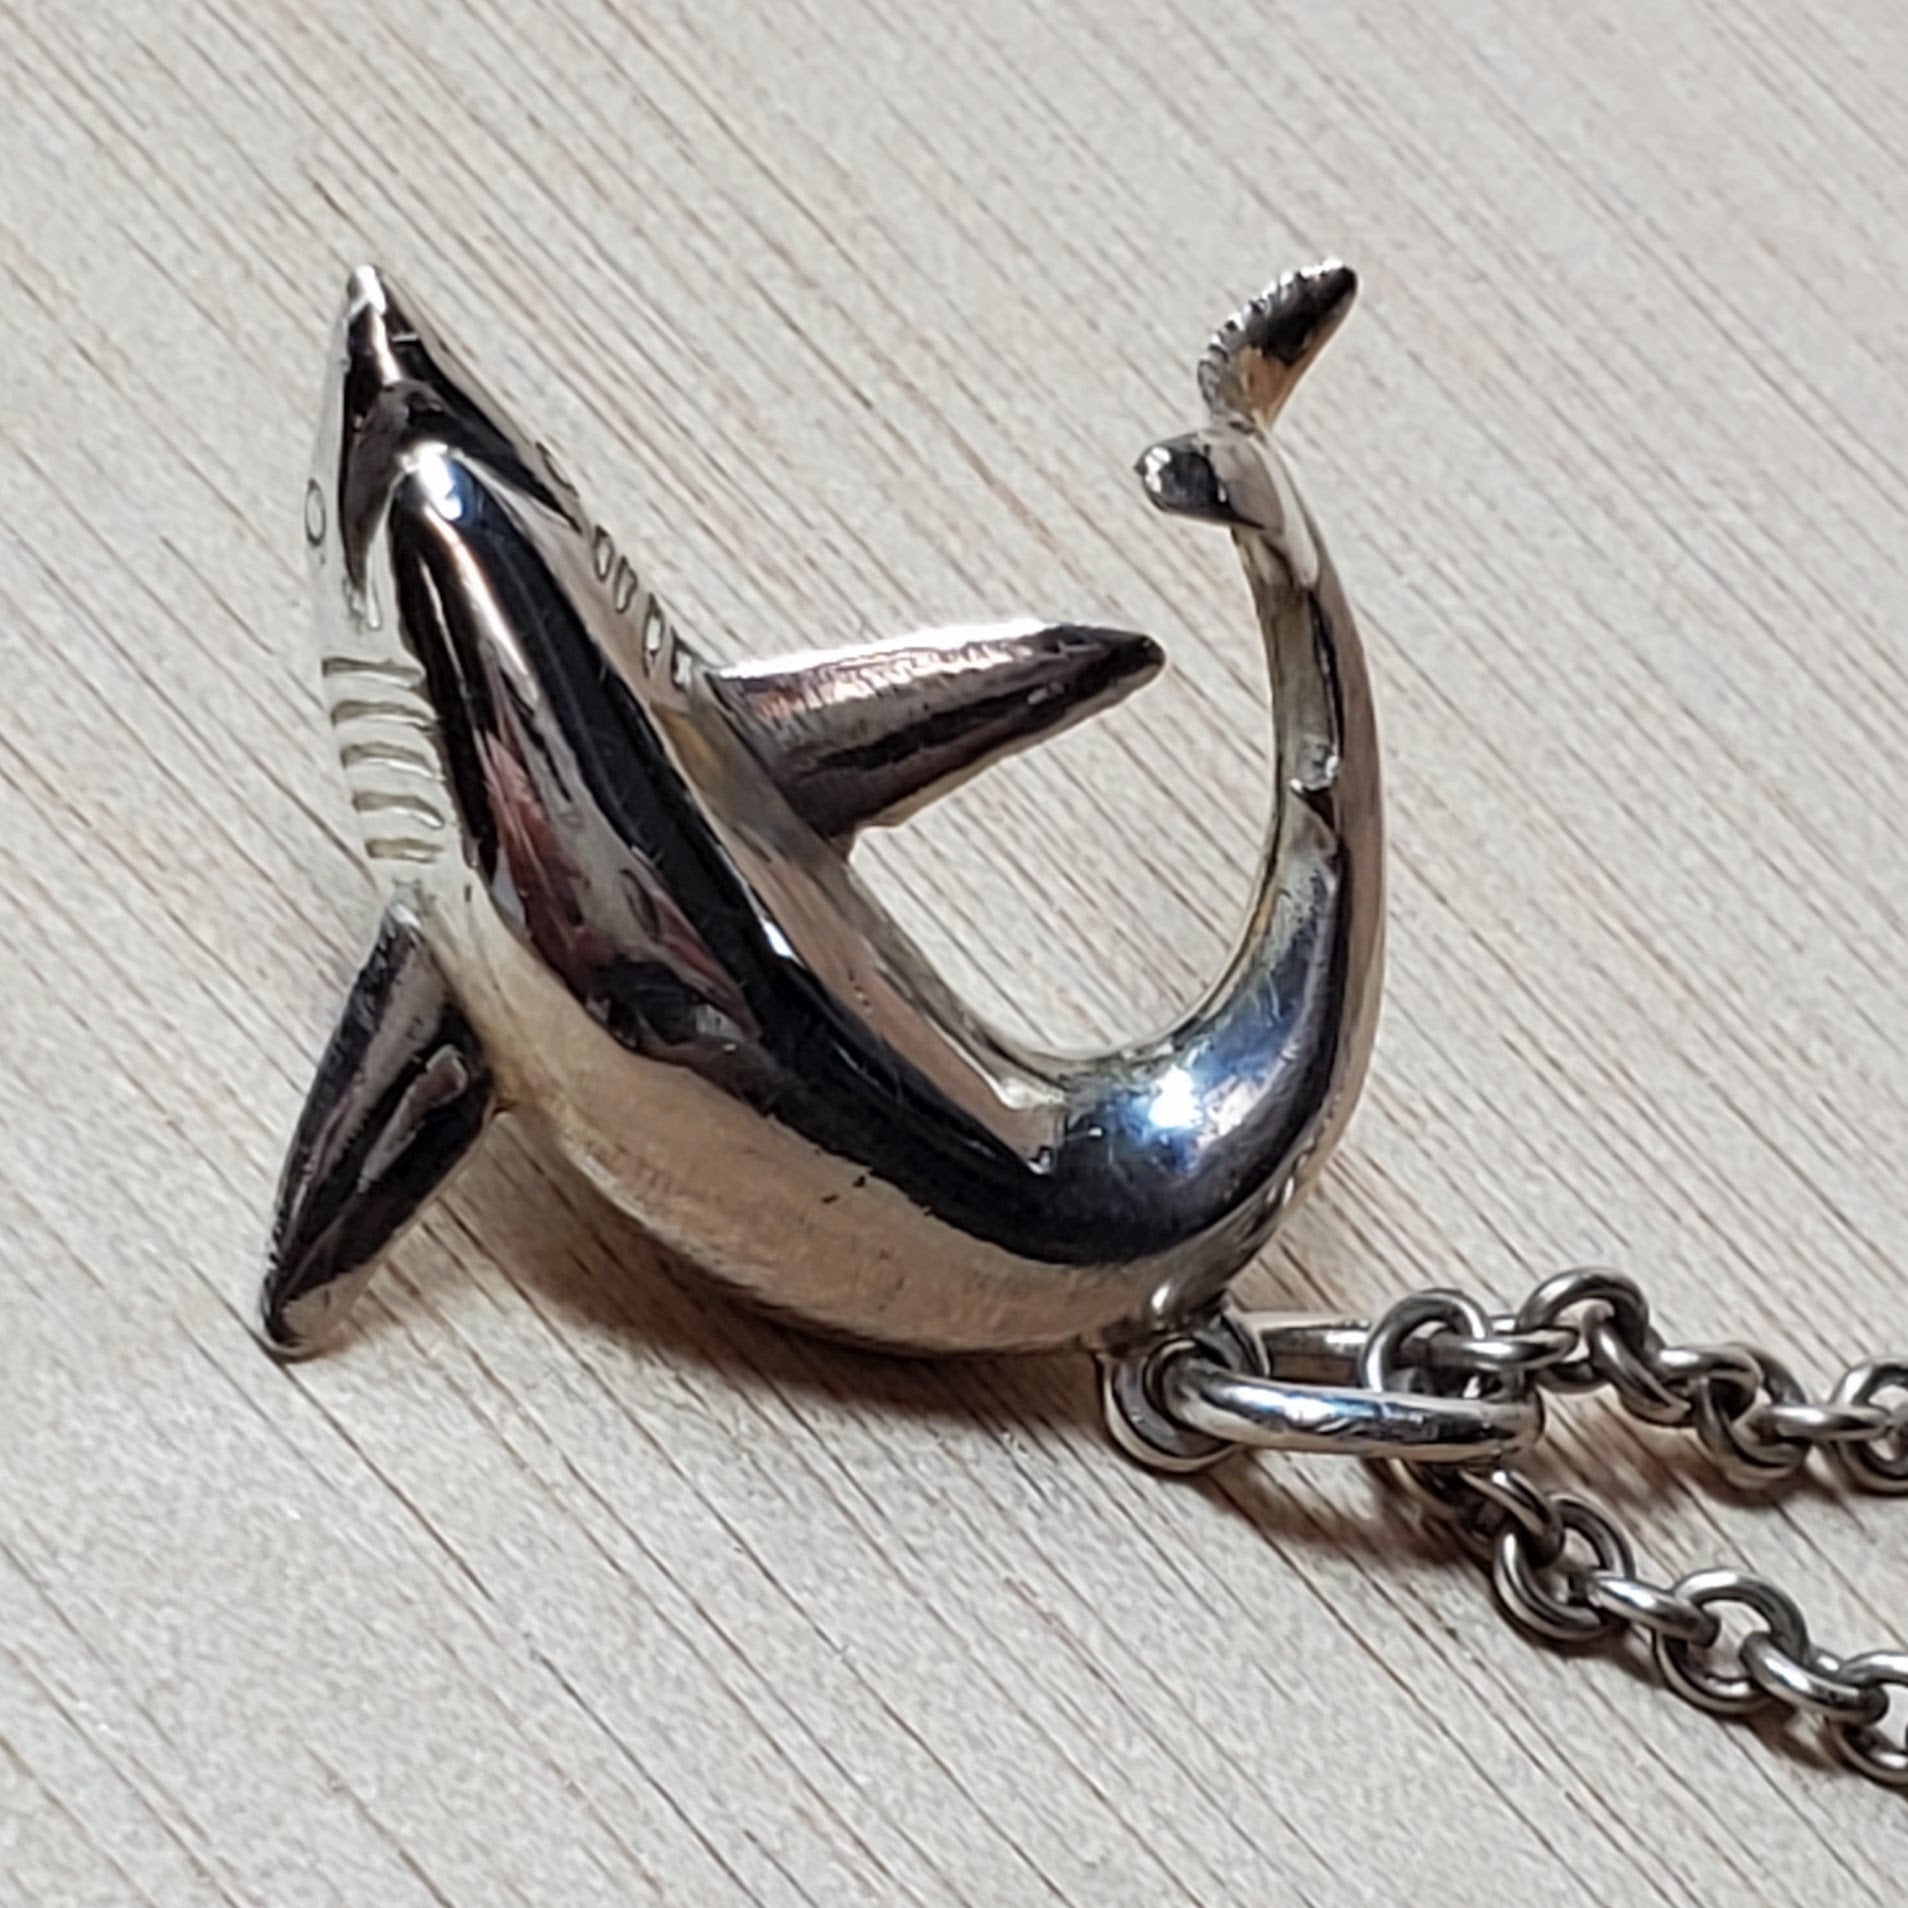 HAND CARVED SOLID STERLING SILVER SHARK PENDANT